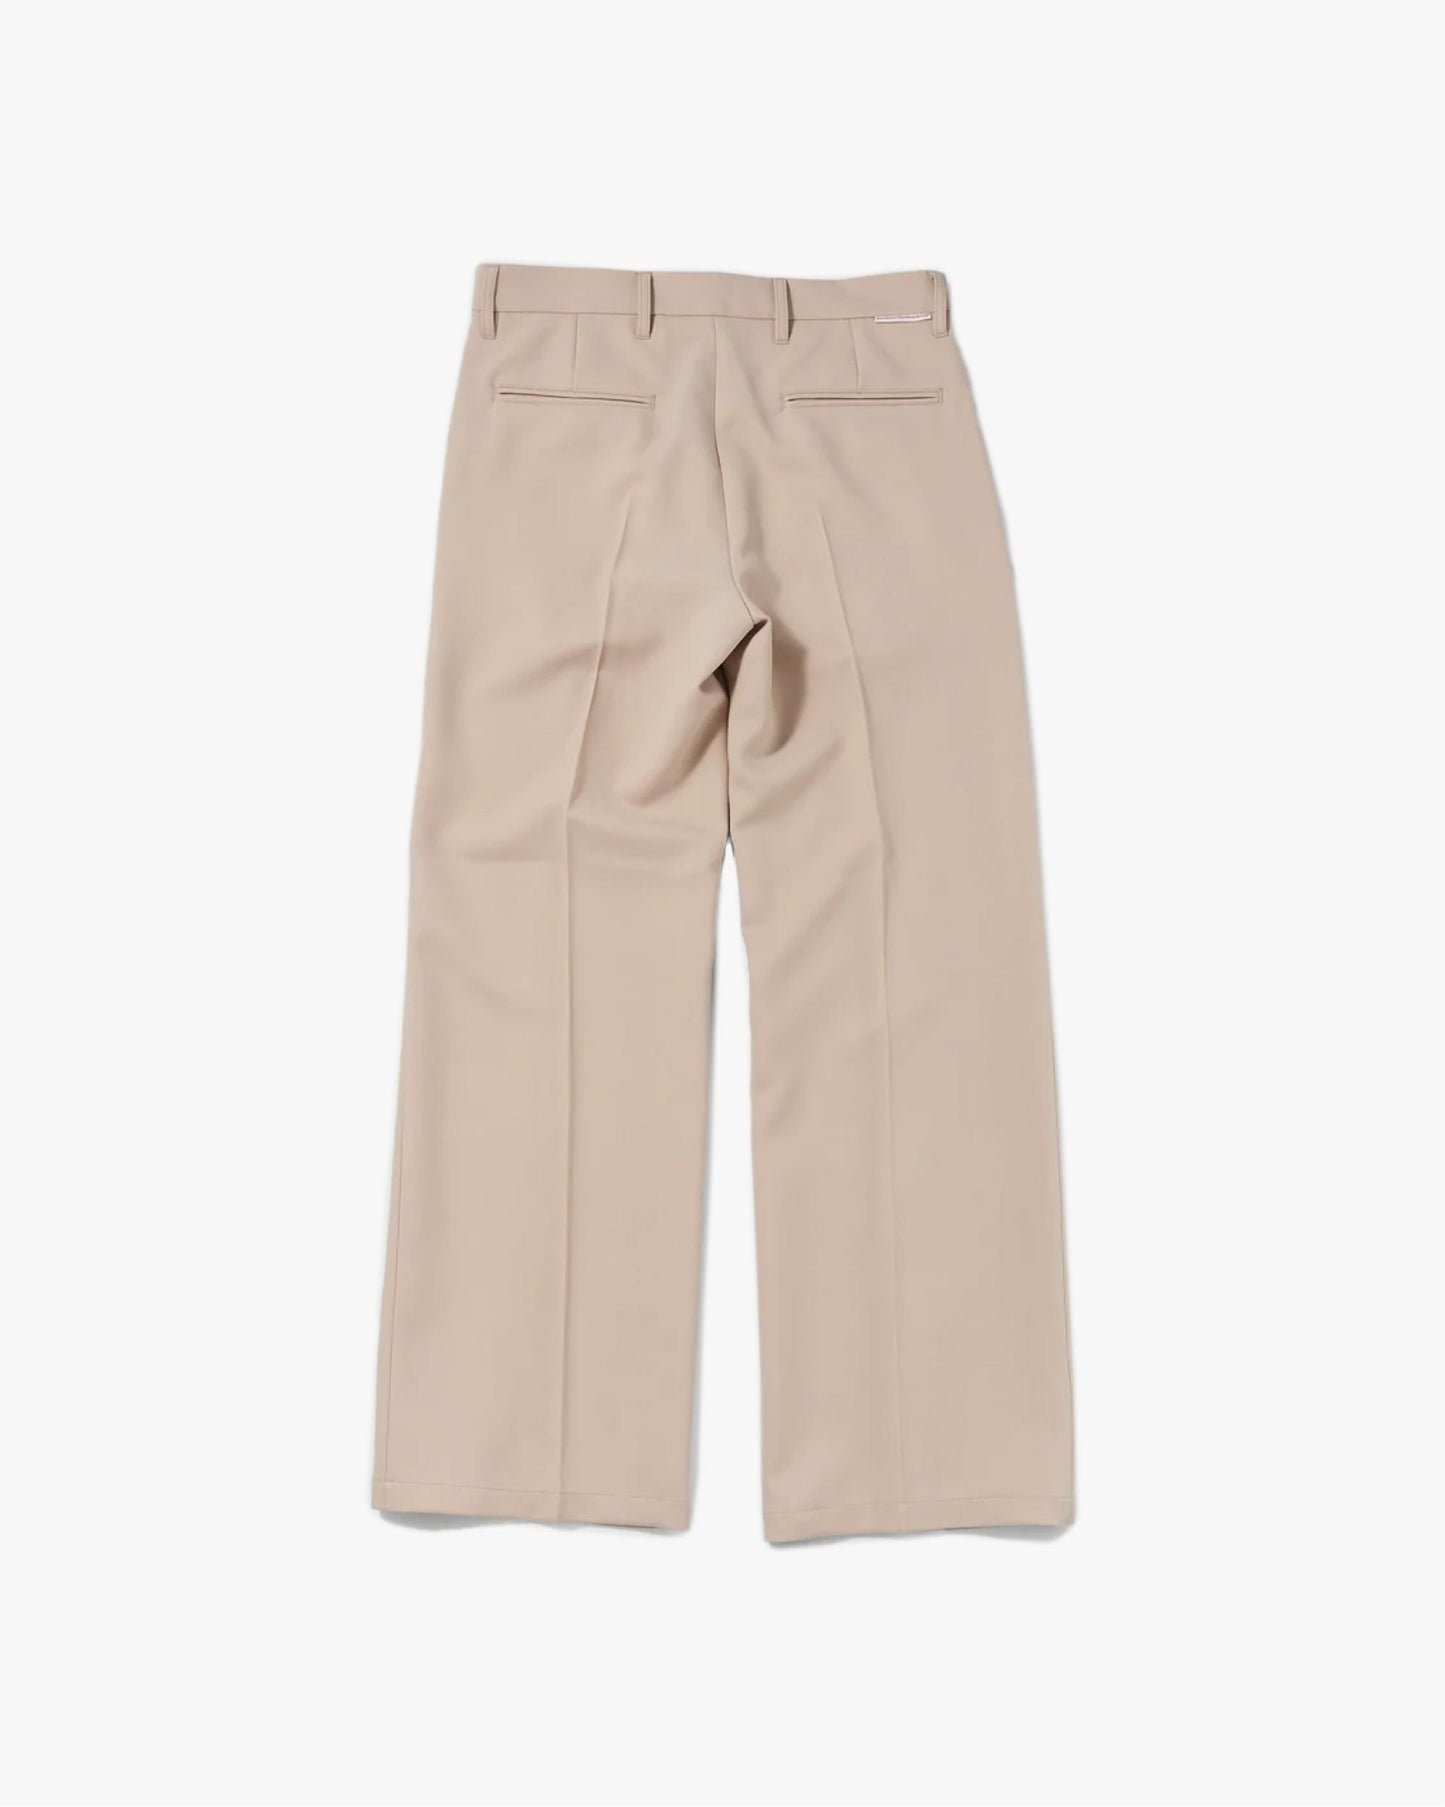 STOCKHOLM (SURFBOARD) CLUB - Bootcut Trousers Sand